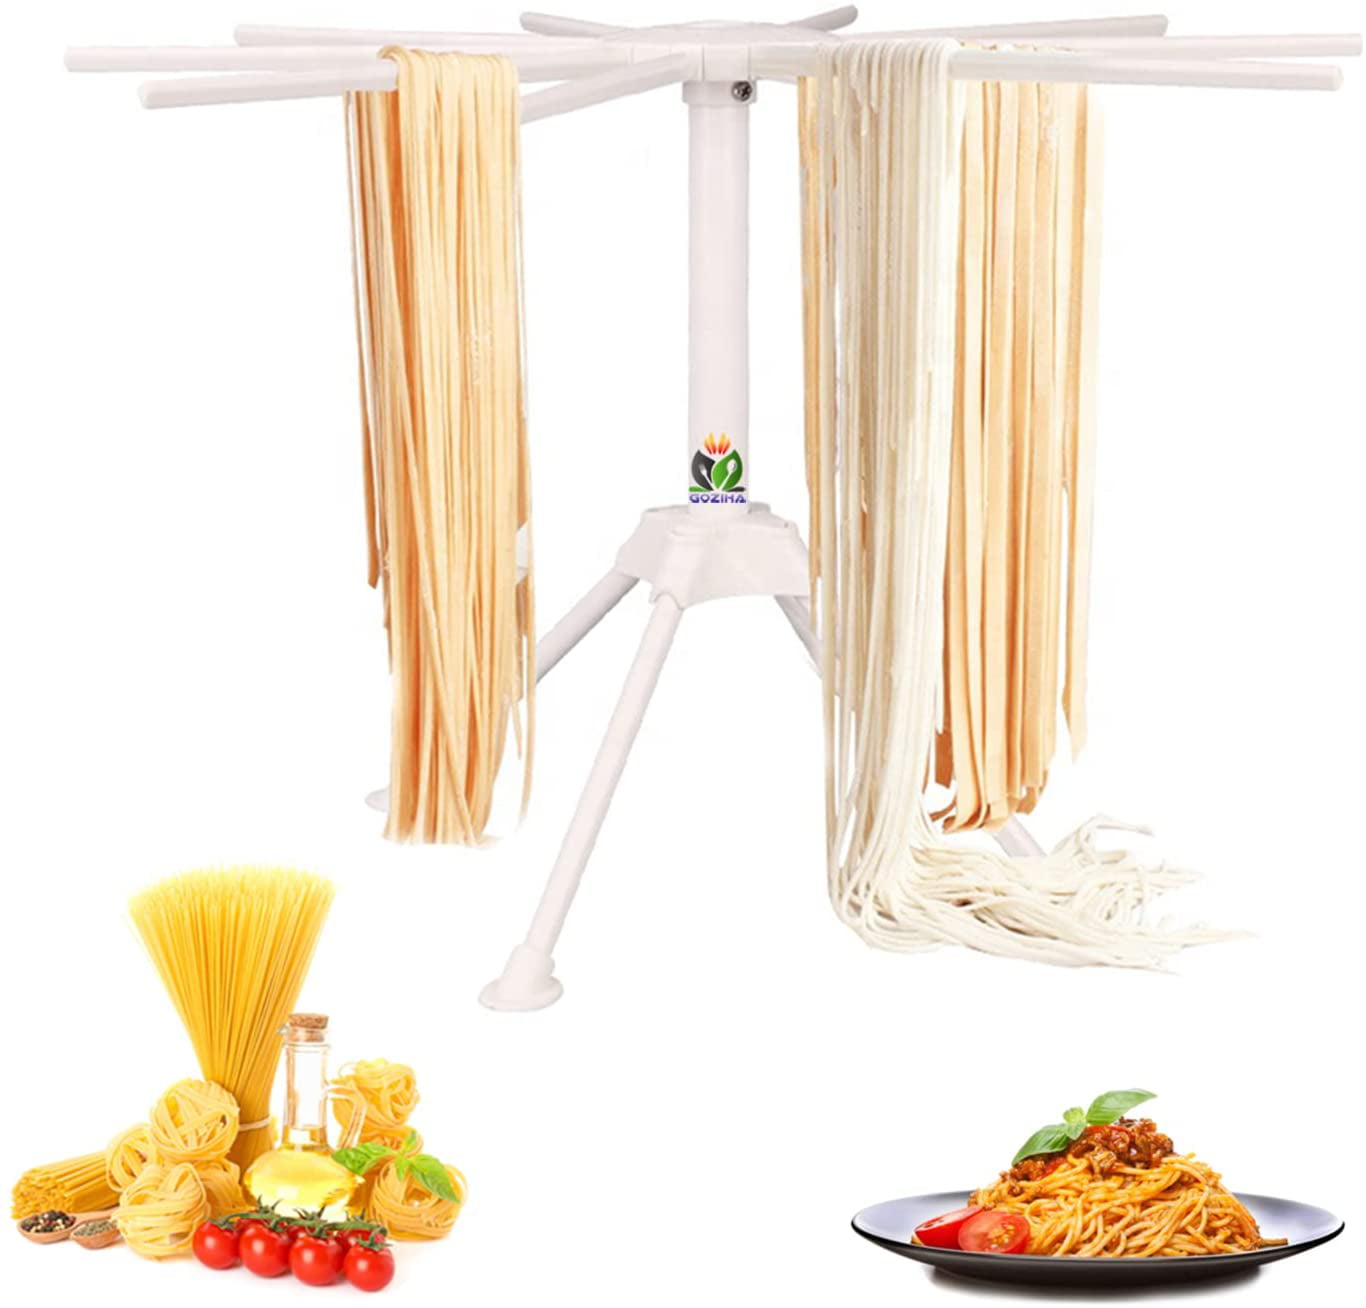 Pasta Drying Rack with 10 Bar Handles Collapsible Noodle Drying Rack Stand for Homemade Pasta and Noodle Household Noodle Stander Holder for Long Spaghetti Fettuccine Lasagne Sheets 